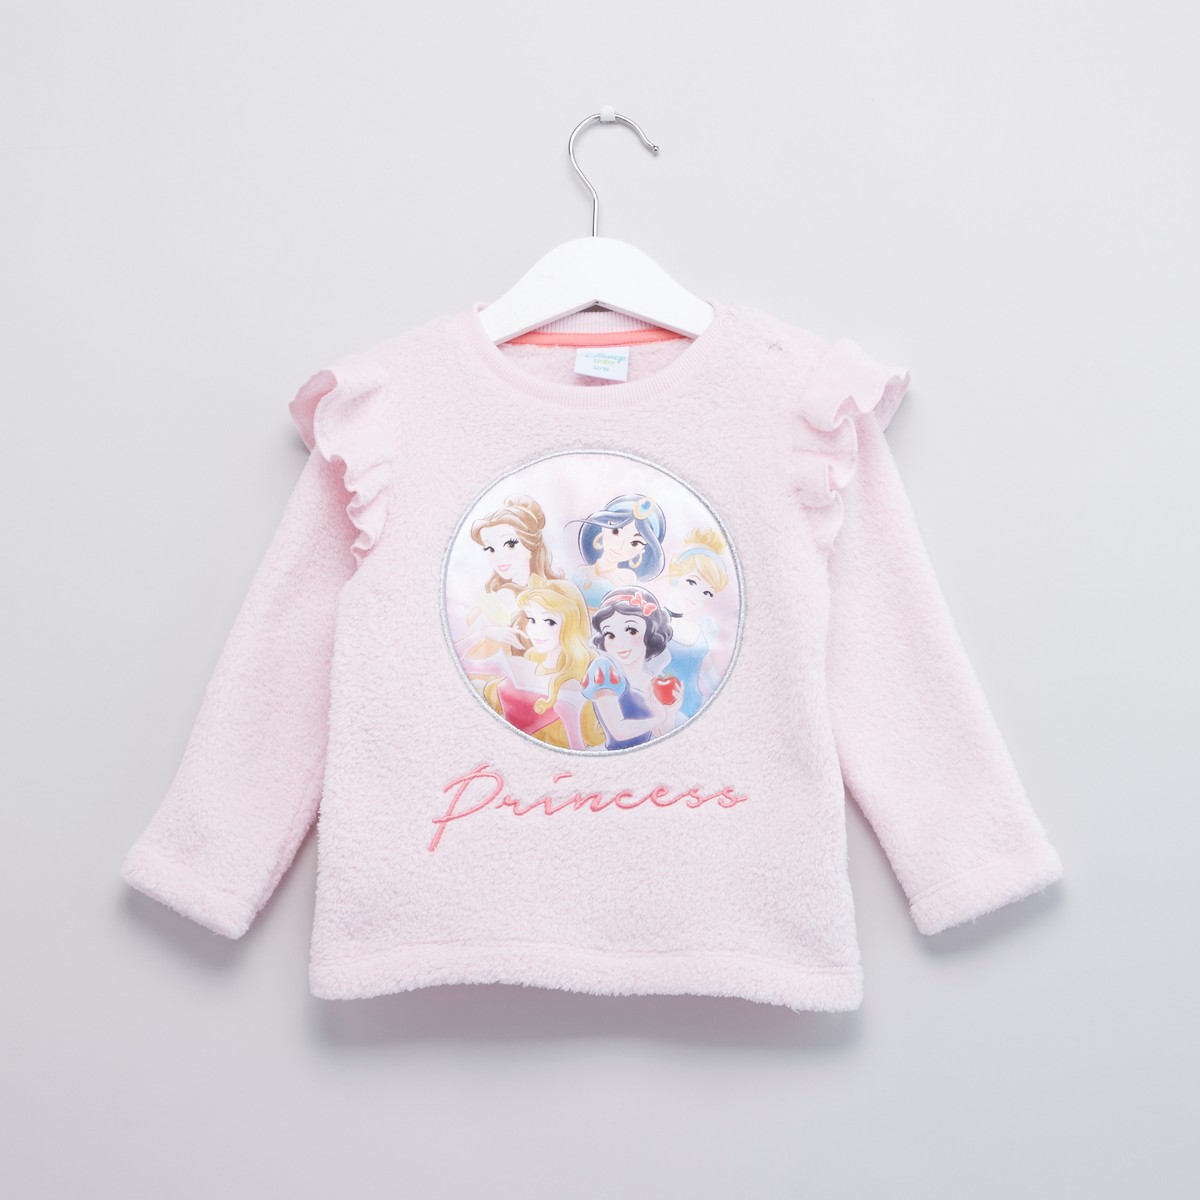 Disney Princess Printed Sweater with Long Sleeves and Ruffle Detail 1